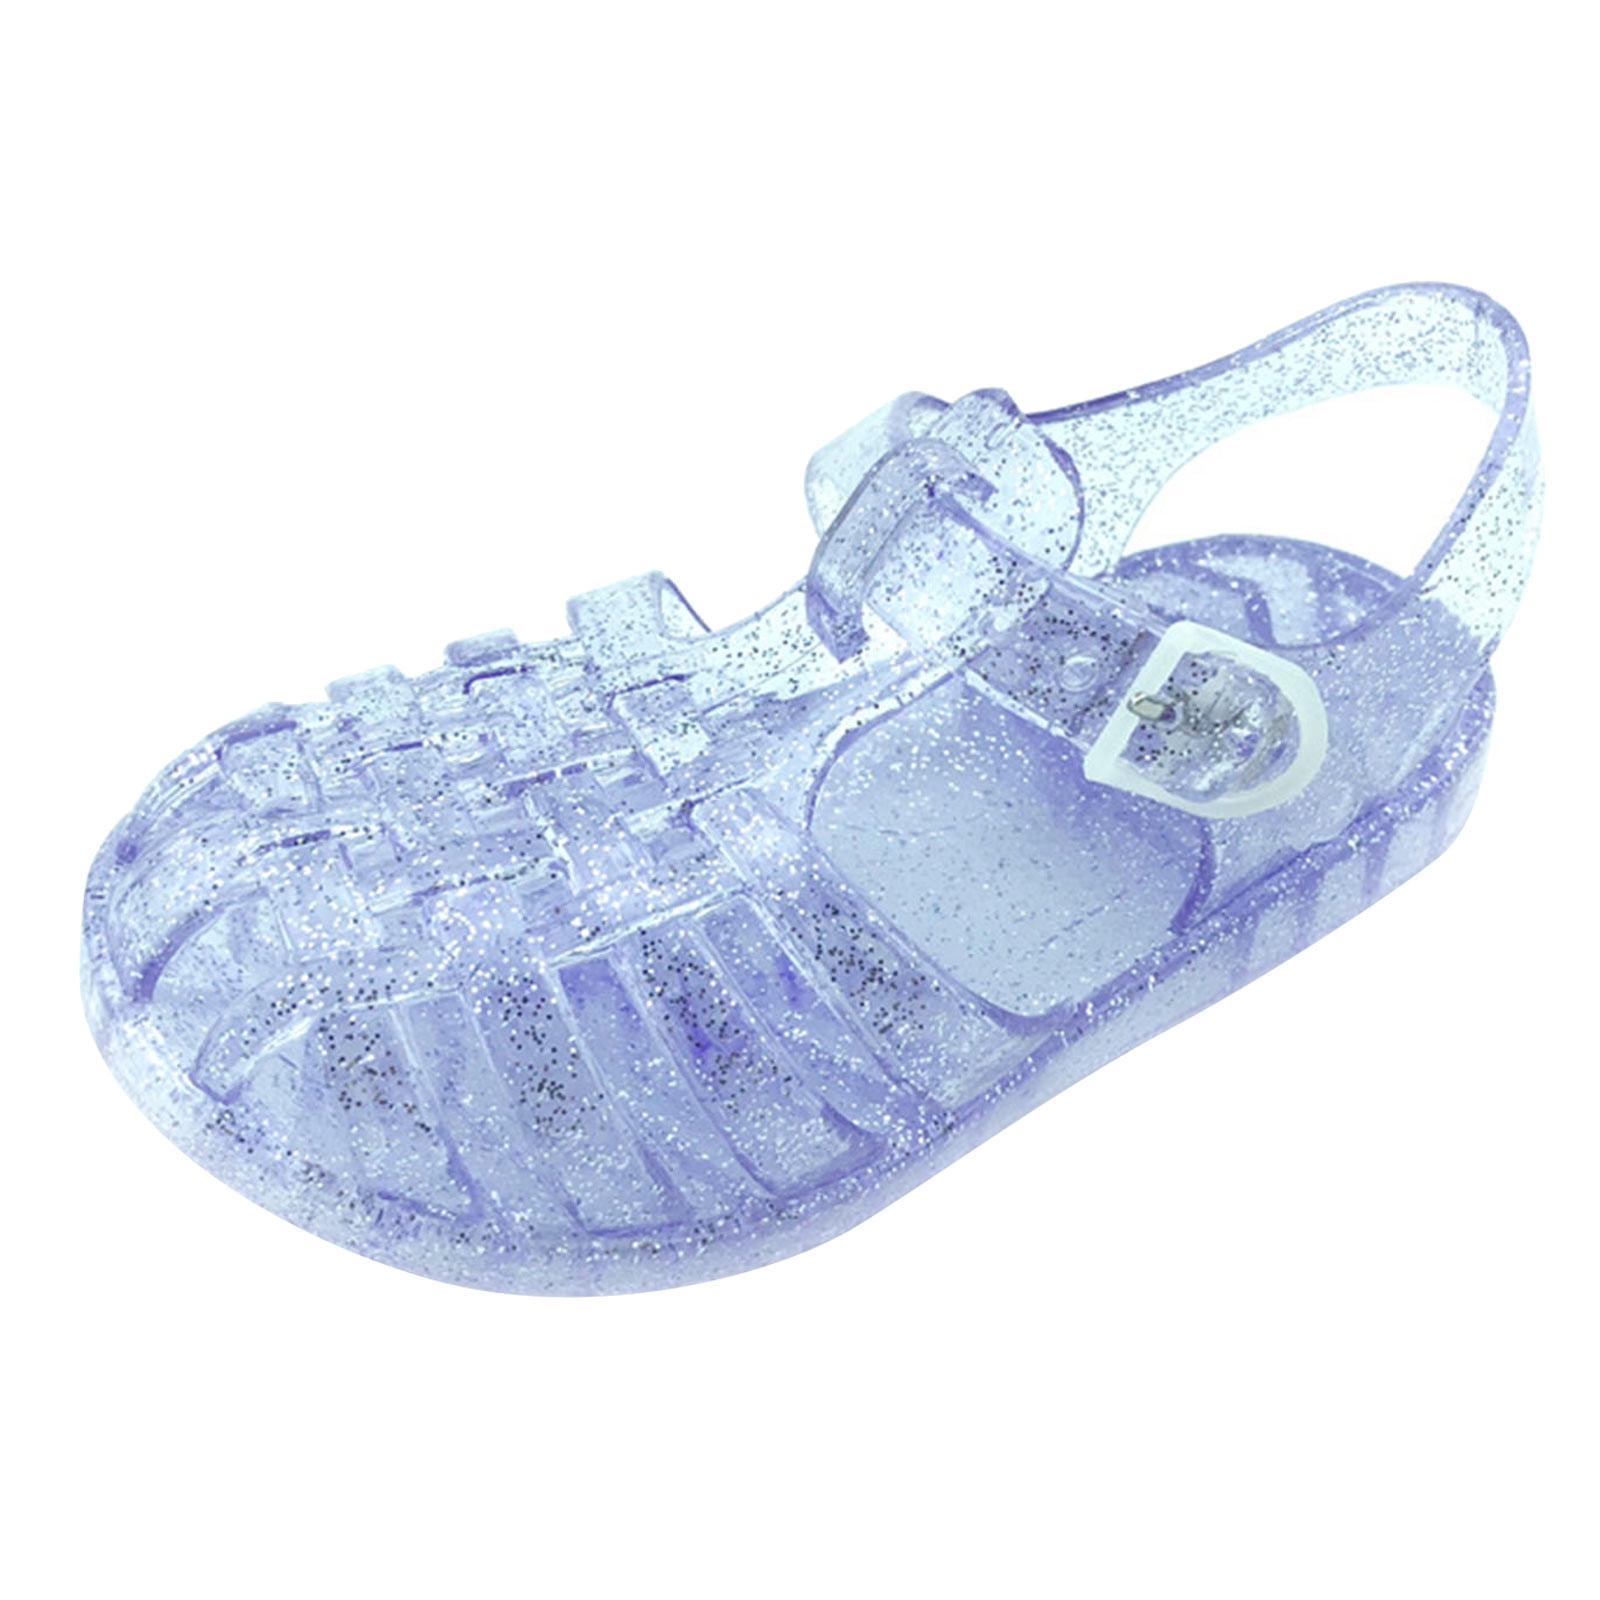 VerPetridure Clearance Kids Sandals for Girls Toddler Shoes Baby Girls ...